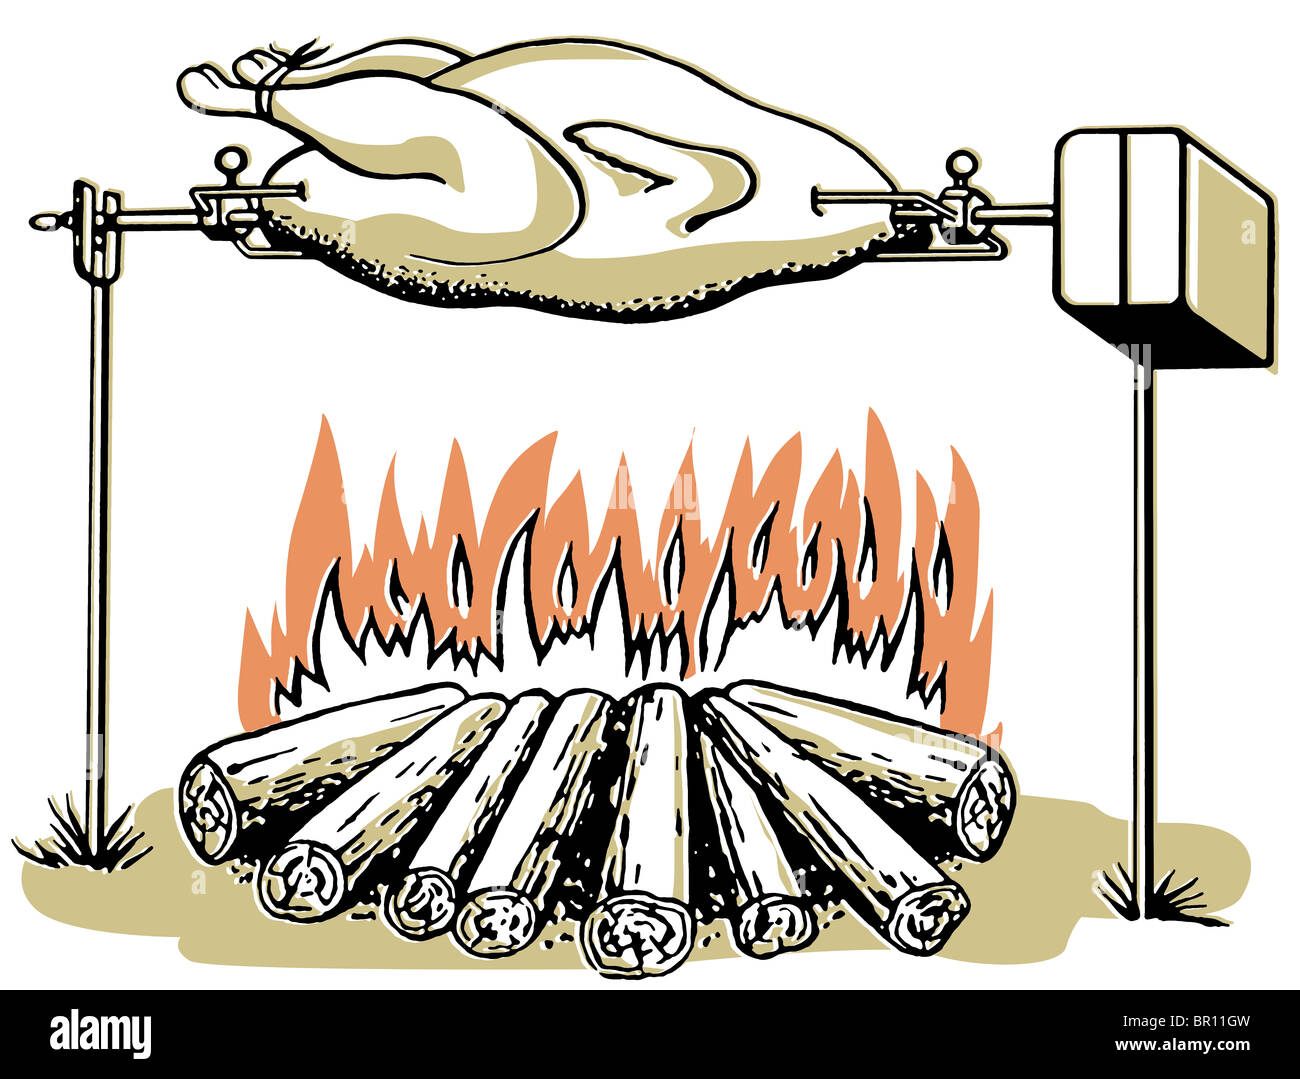 An illustration of a chicken roasting on an open fire Stock Photo